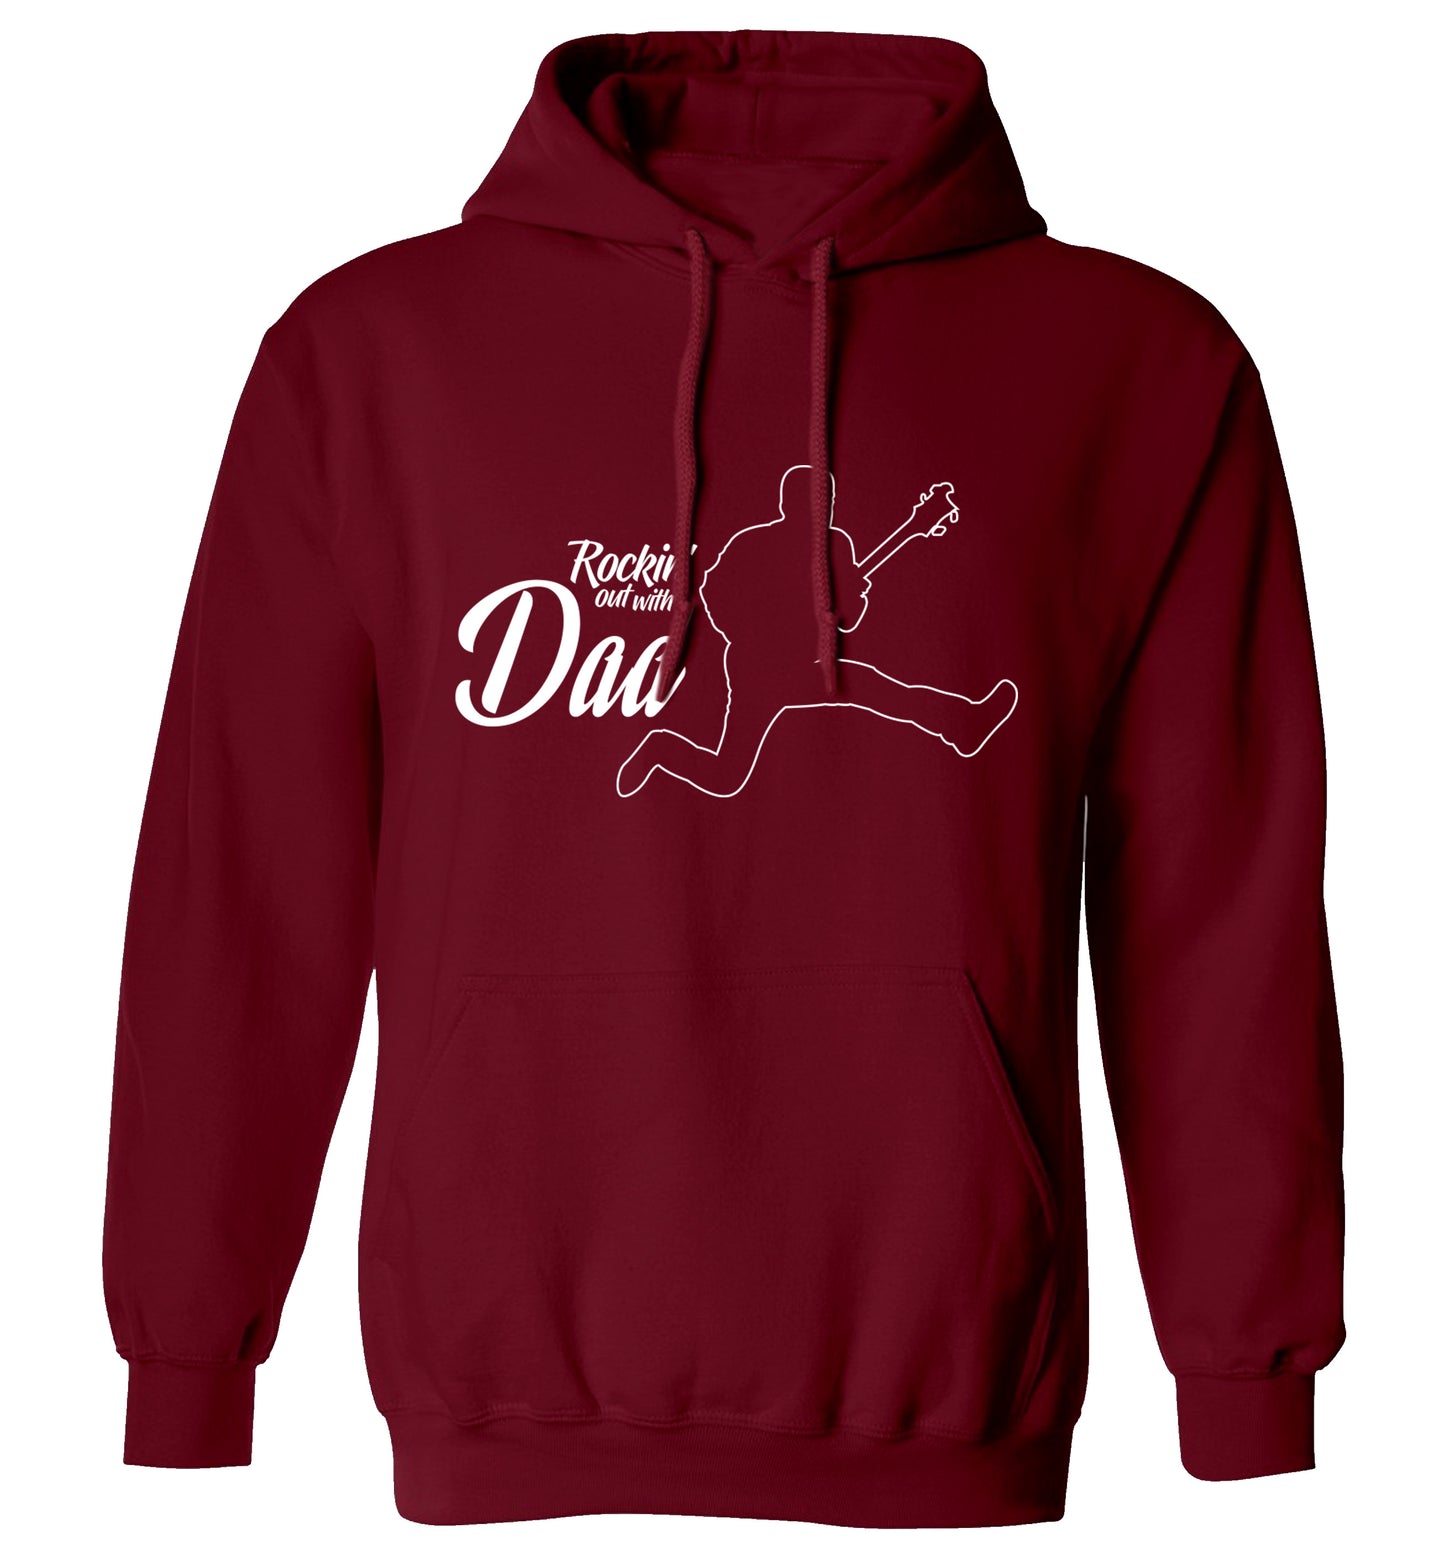 Rockin out with dad adults unisex maroon hoodie 2XL